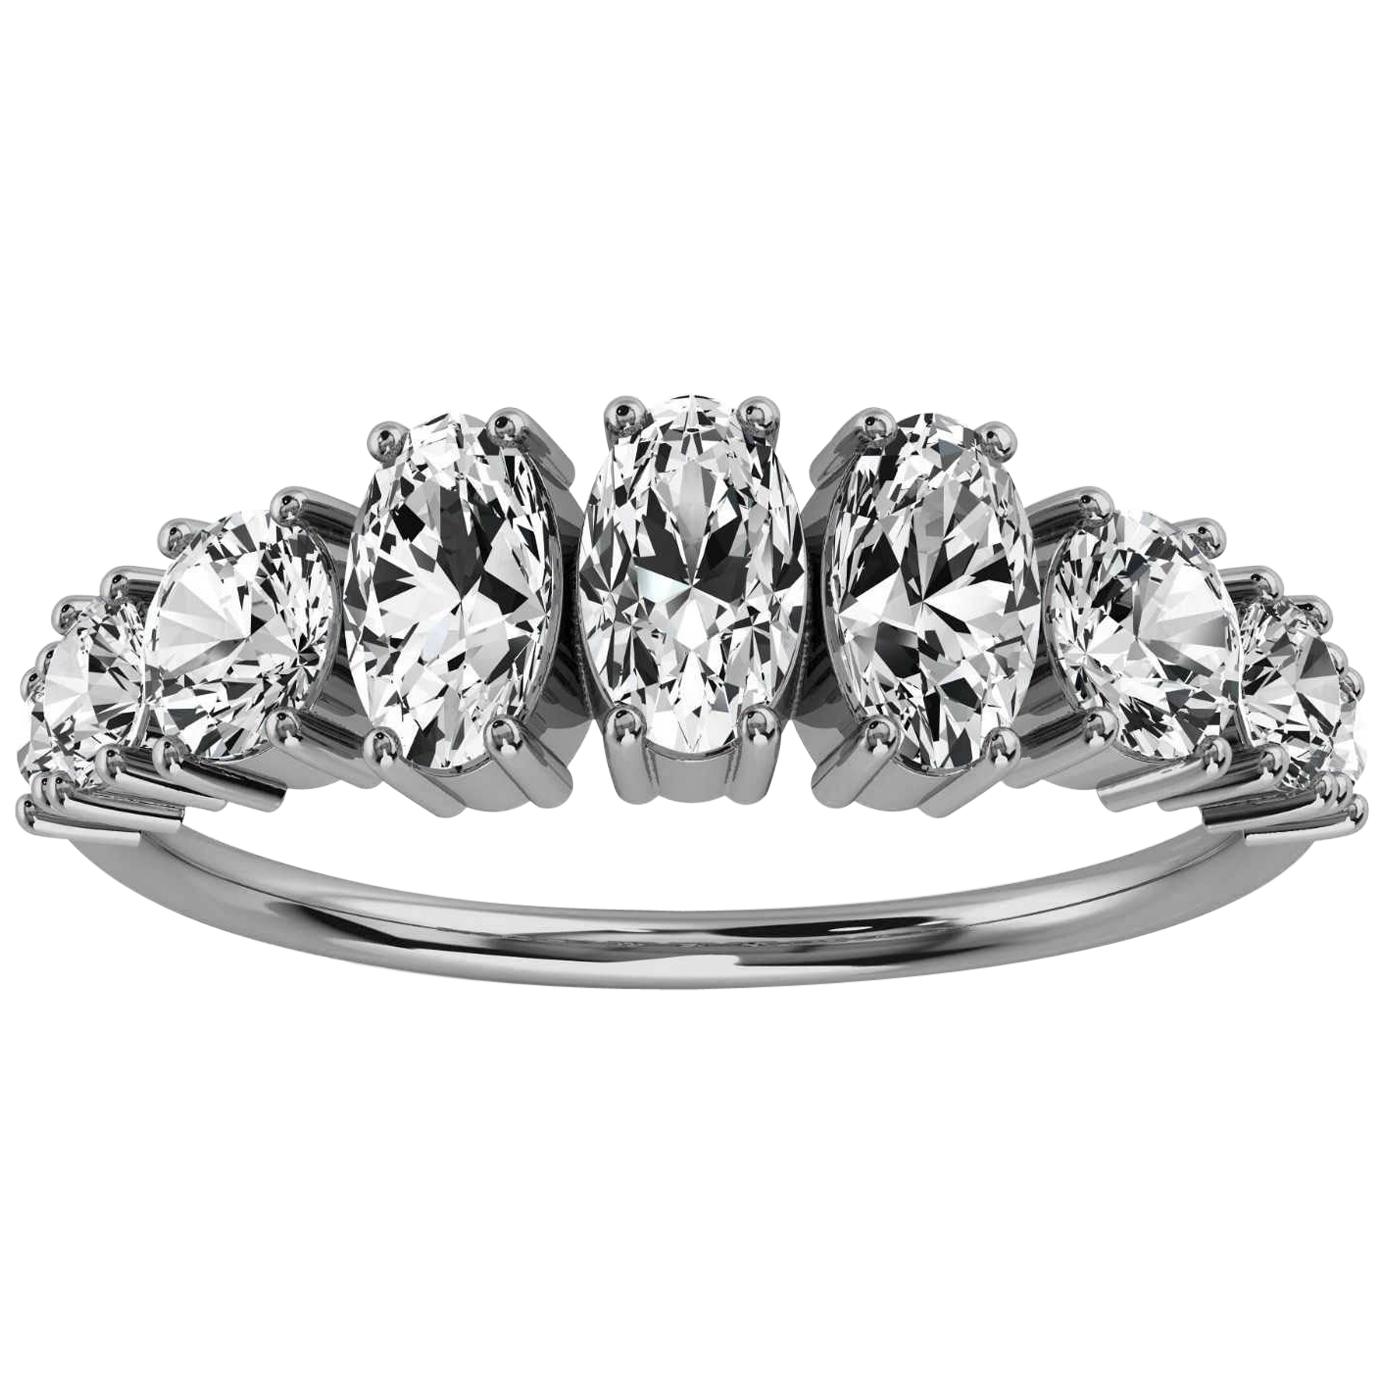 14k White Gold Kym Oval and Round Organic Design Diamond Ring '1 1/4 Ct. Tw' For Sale